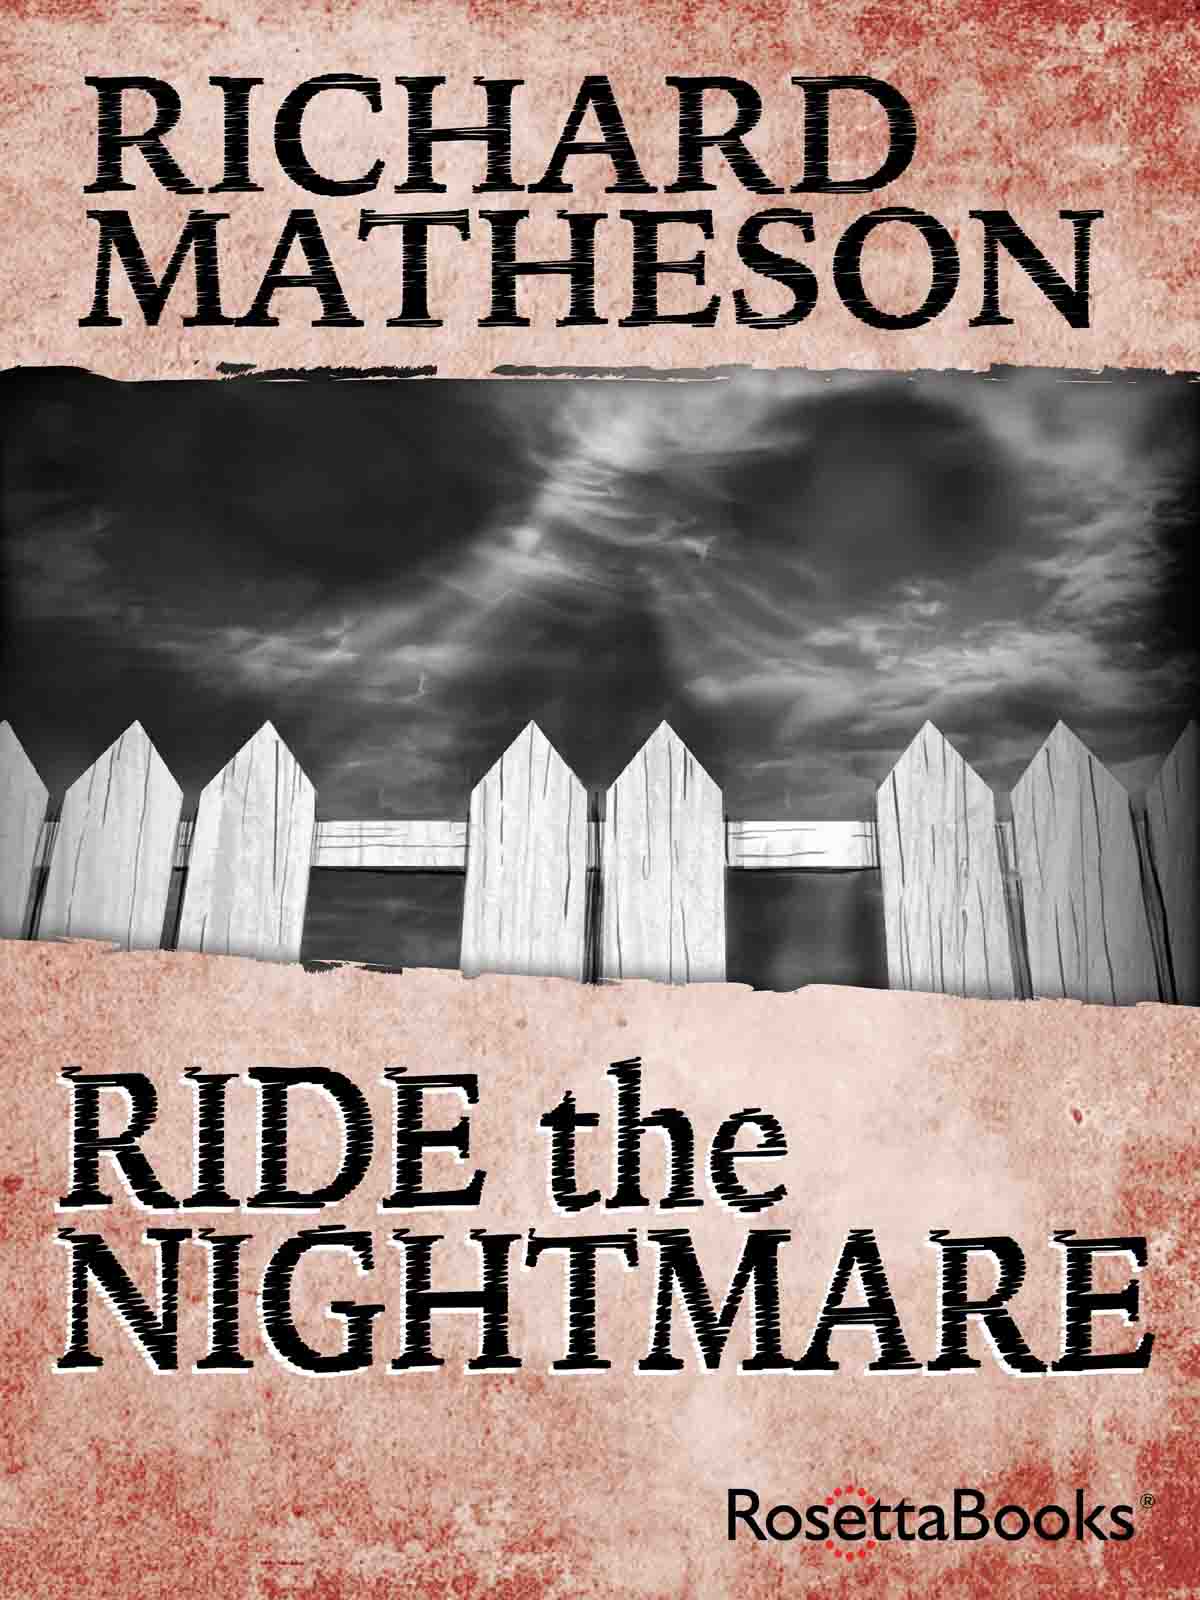 Ride the Nightmare (2014) by Richard Matheson